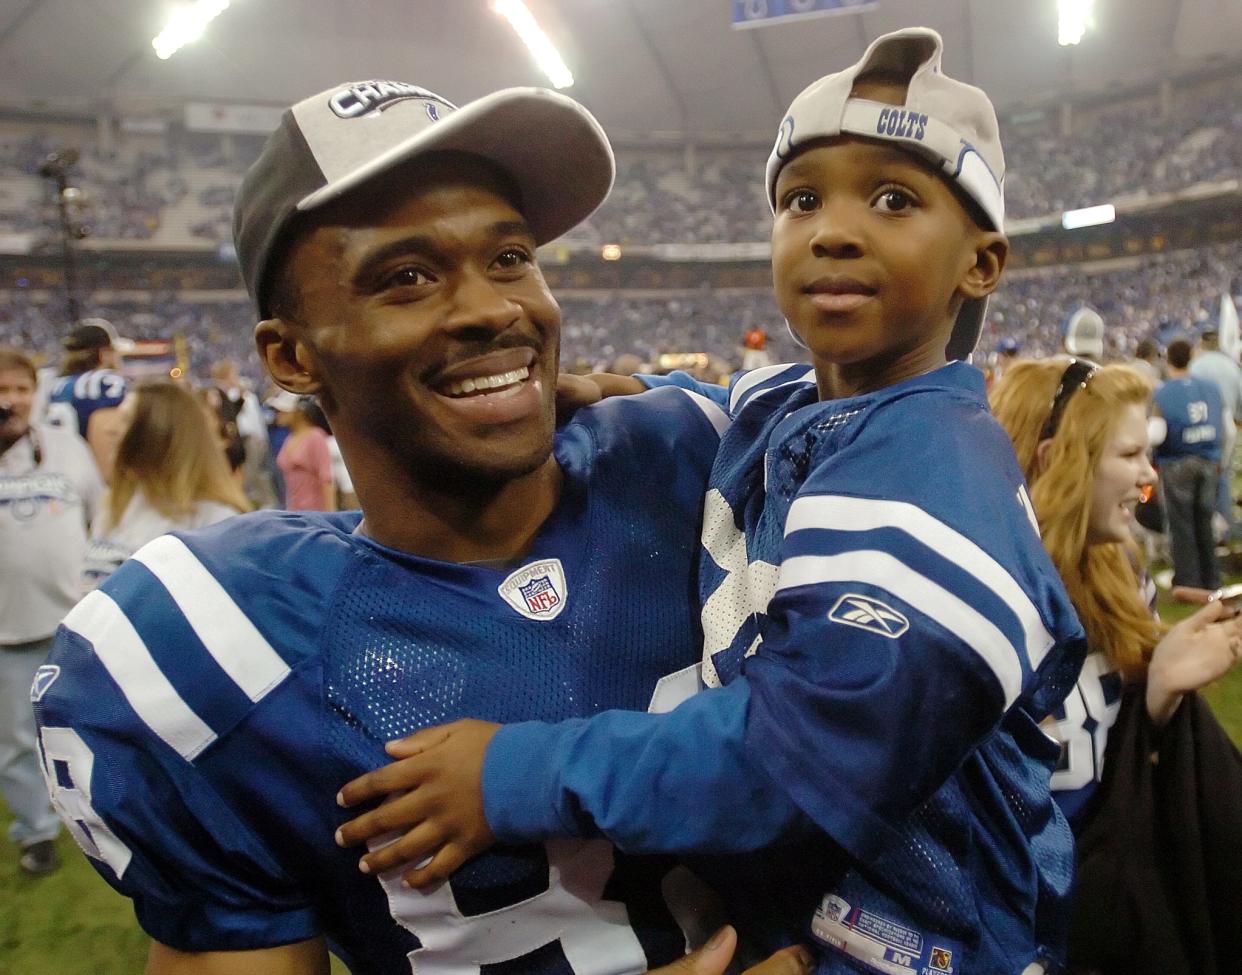 Indianapolis Colts WR Marvin Harrison smiles as he holds his son Marvin Jr. after the Colts defeated the New England Patriots 38-34 in the AFC championship game.